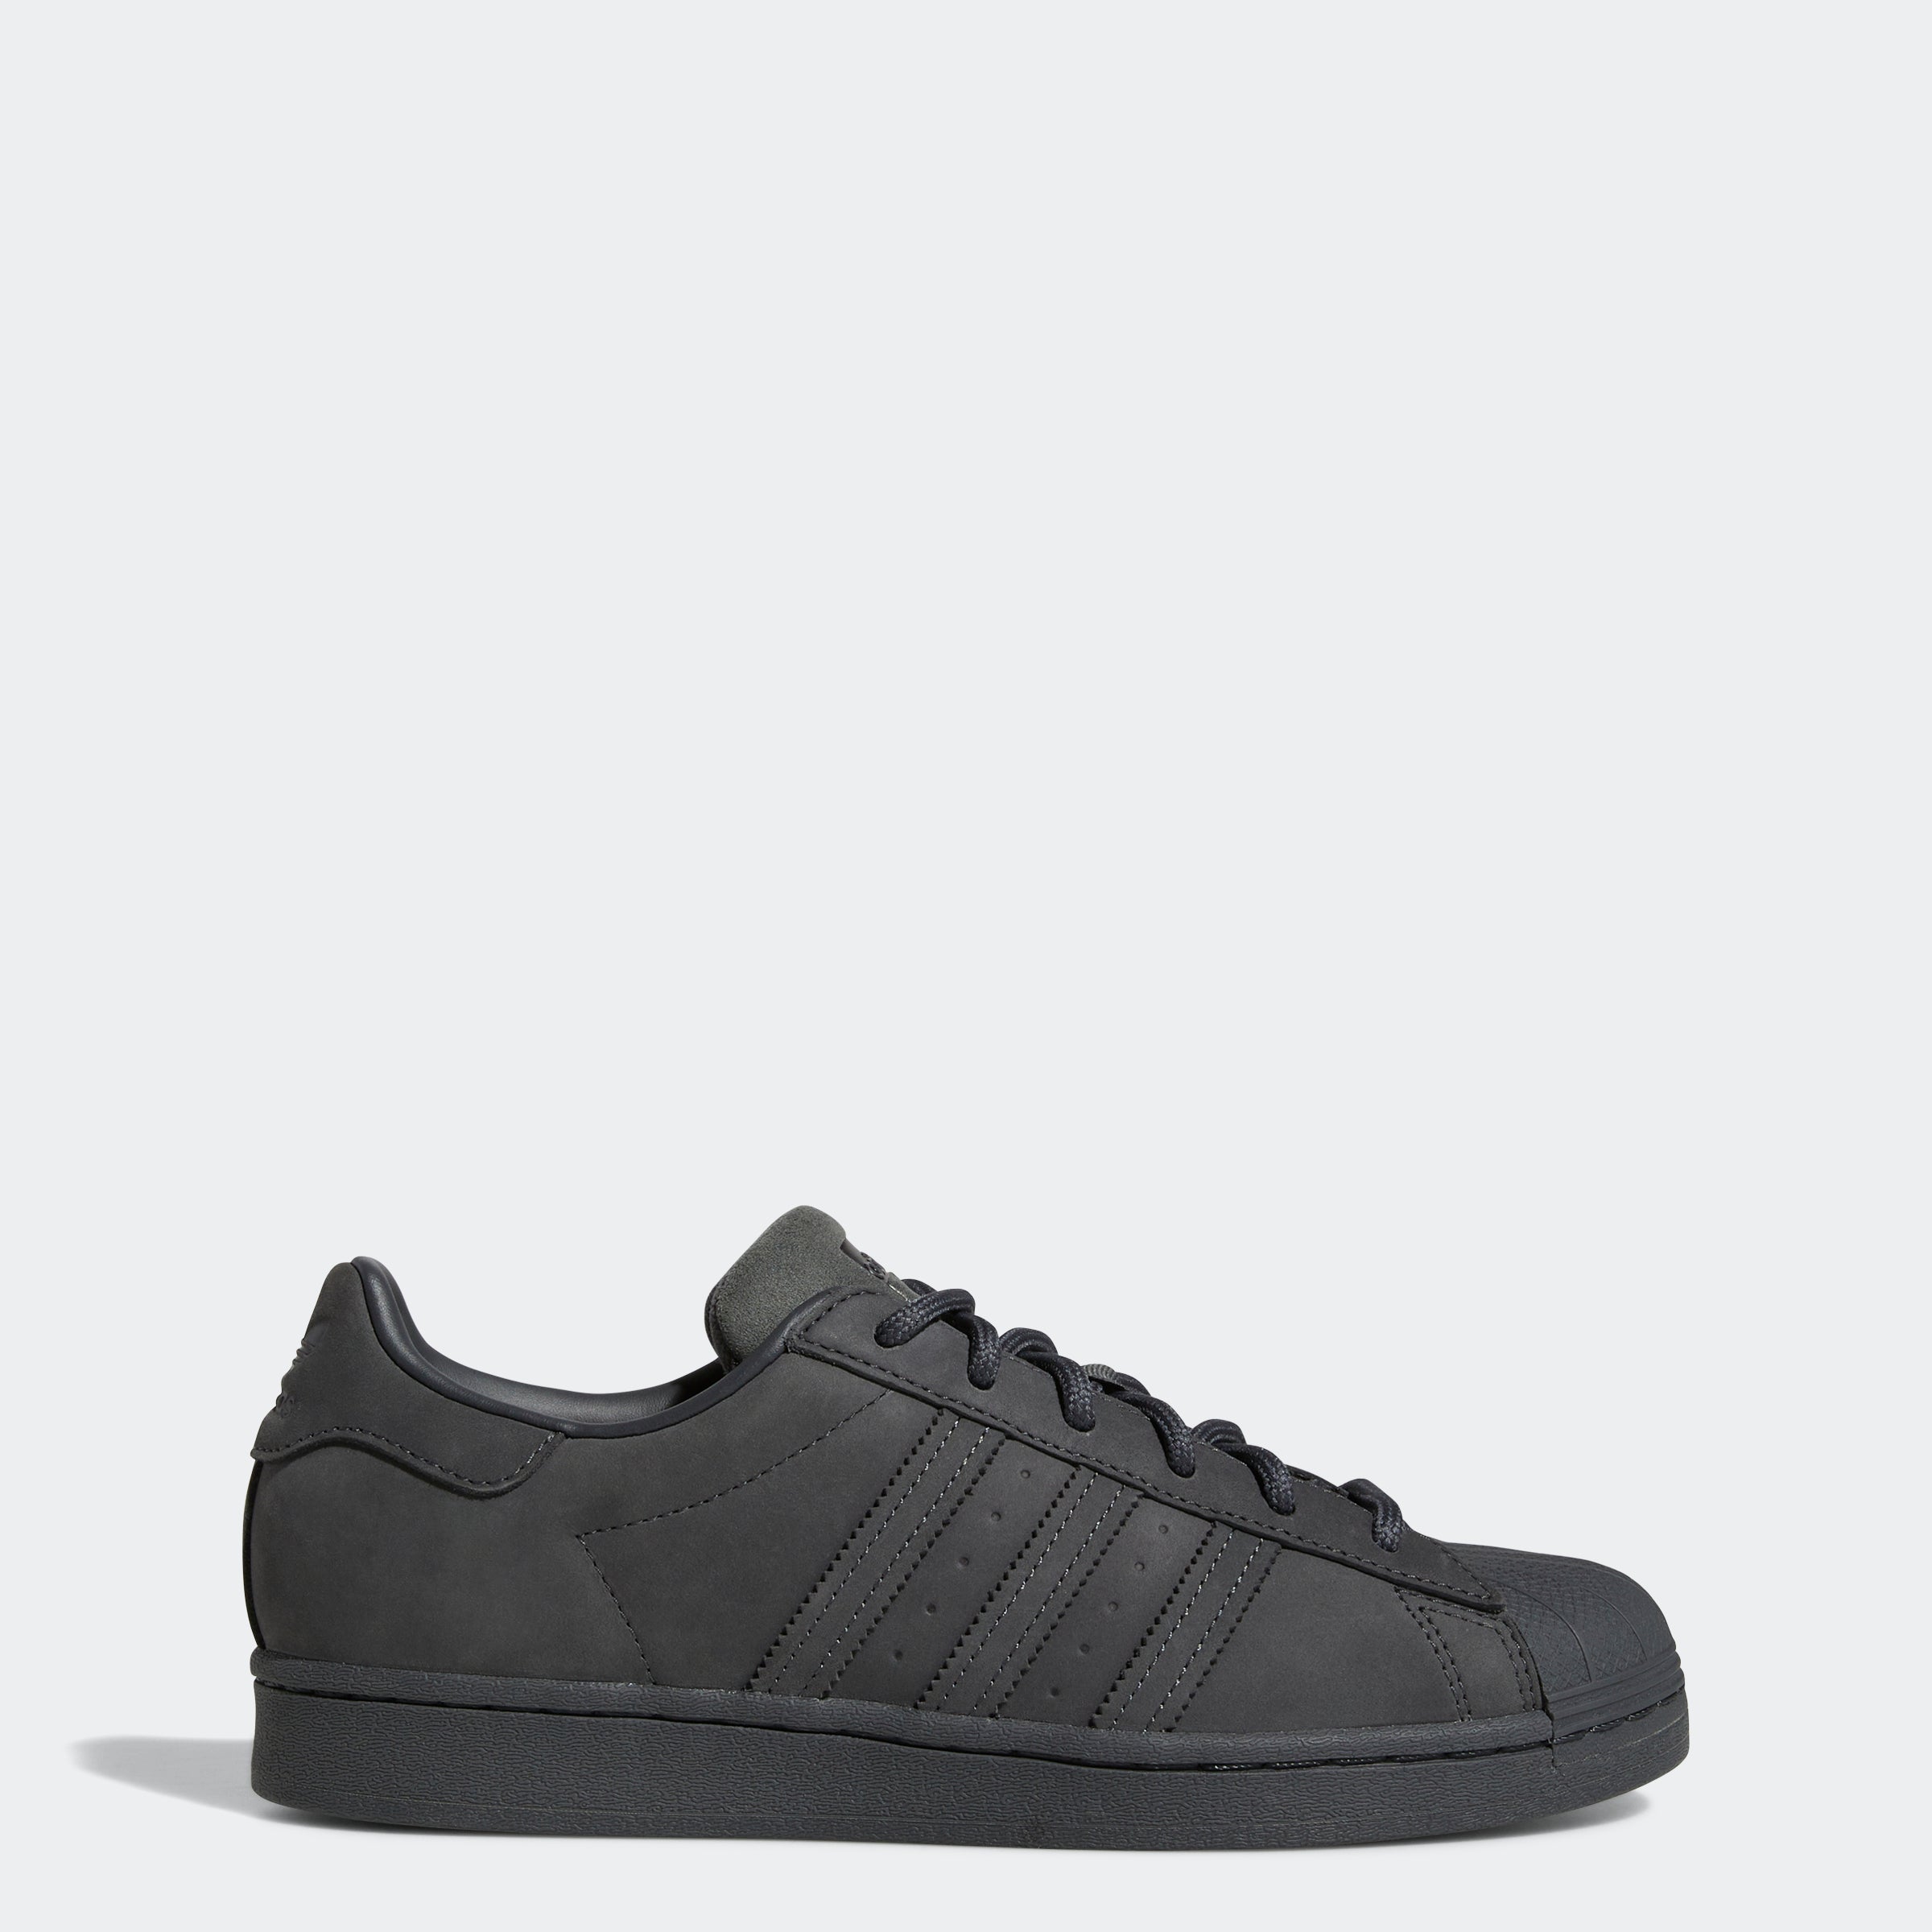 Men's adidas Superstar Shoes Grey Six GZ4830 Chicago City Sports